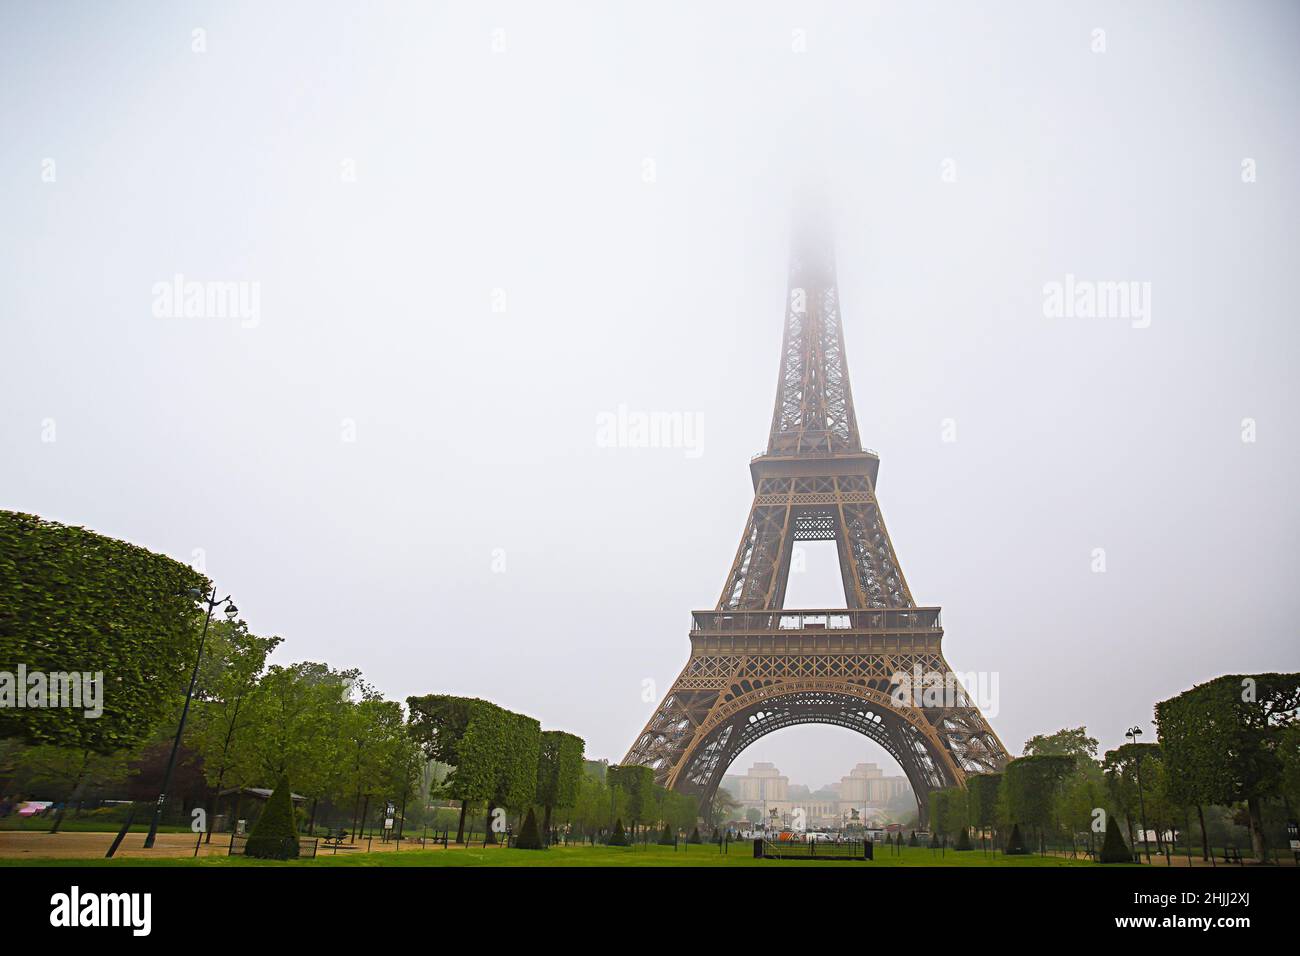 Romantic dreams at the Eiffel Tower. Stock Photo